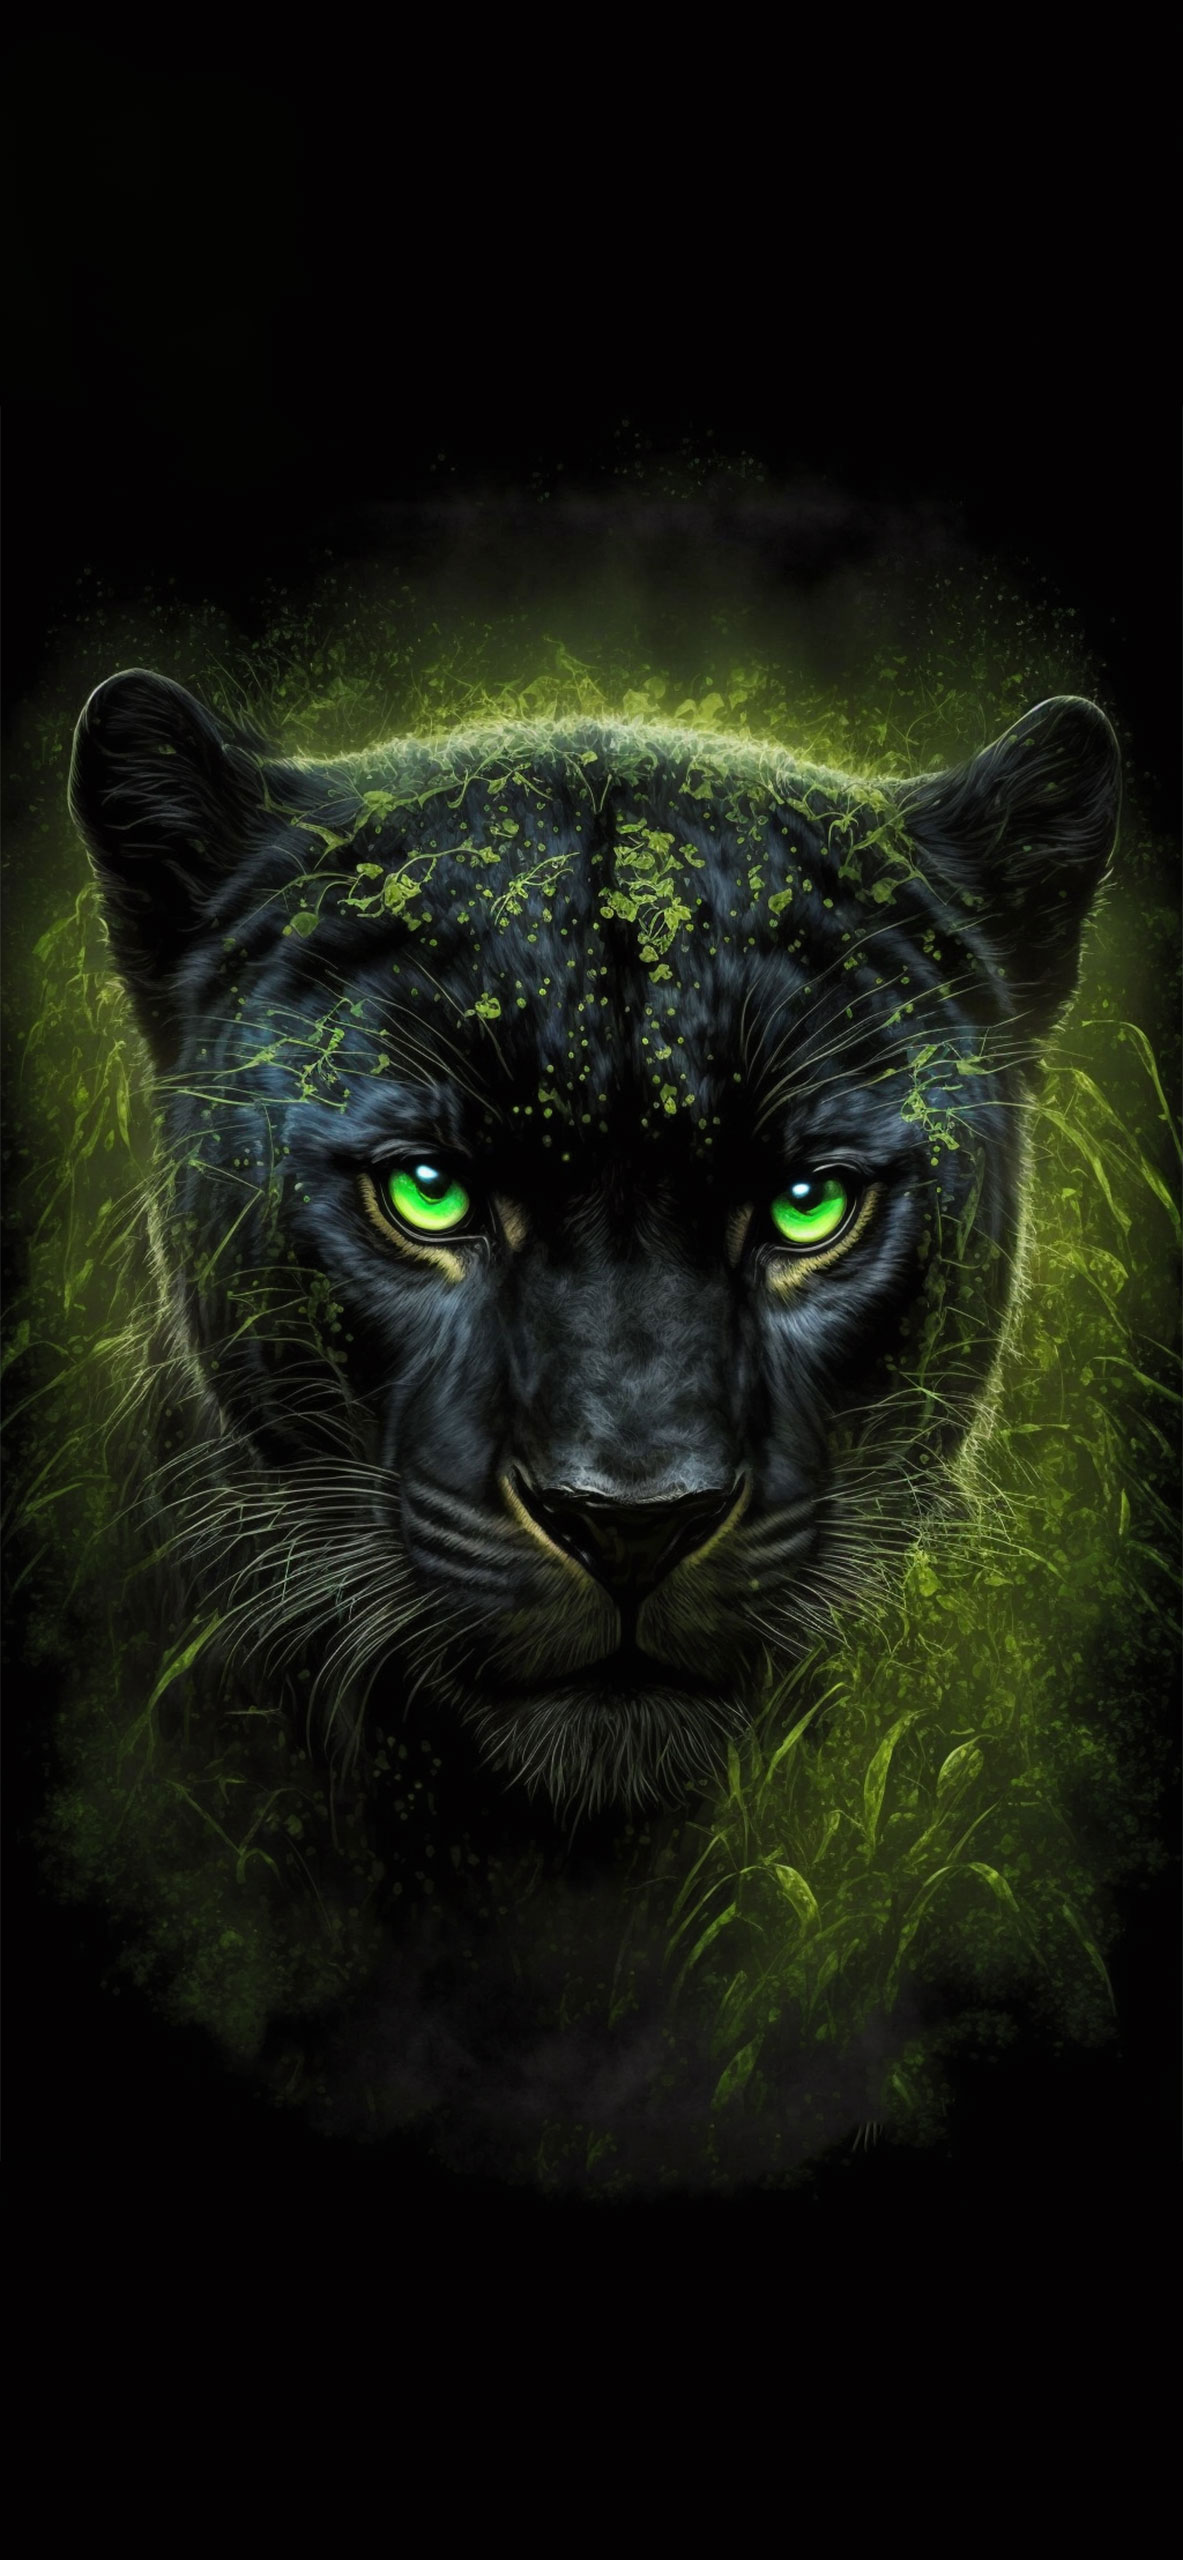 Panther Black & Green Art Wallpapers - Panther Wallpapers iPhone